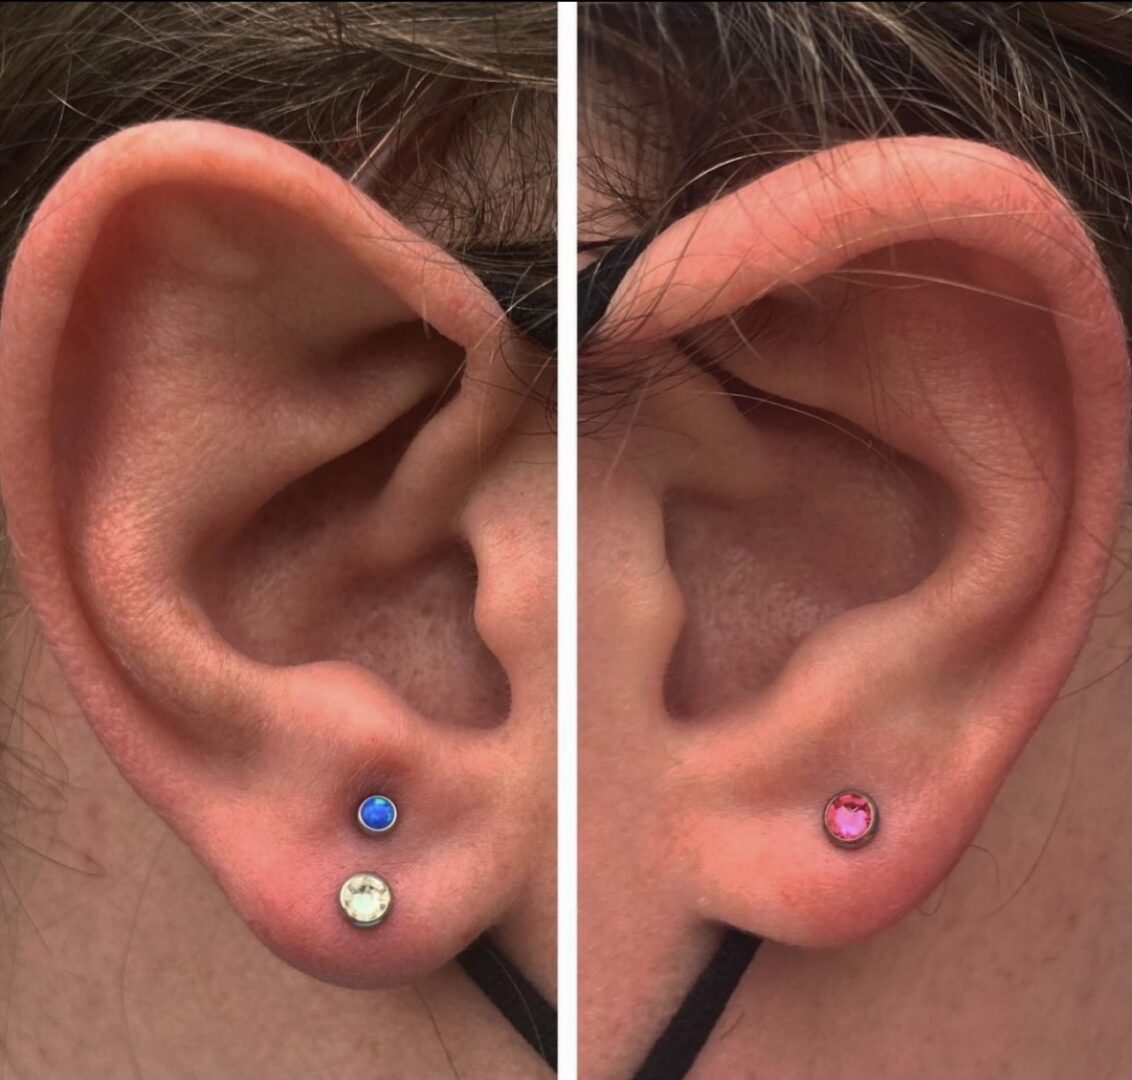 A woman 's ear with two different colored stones.